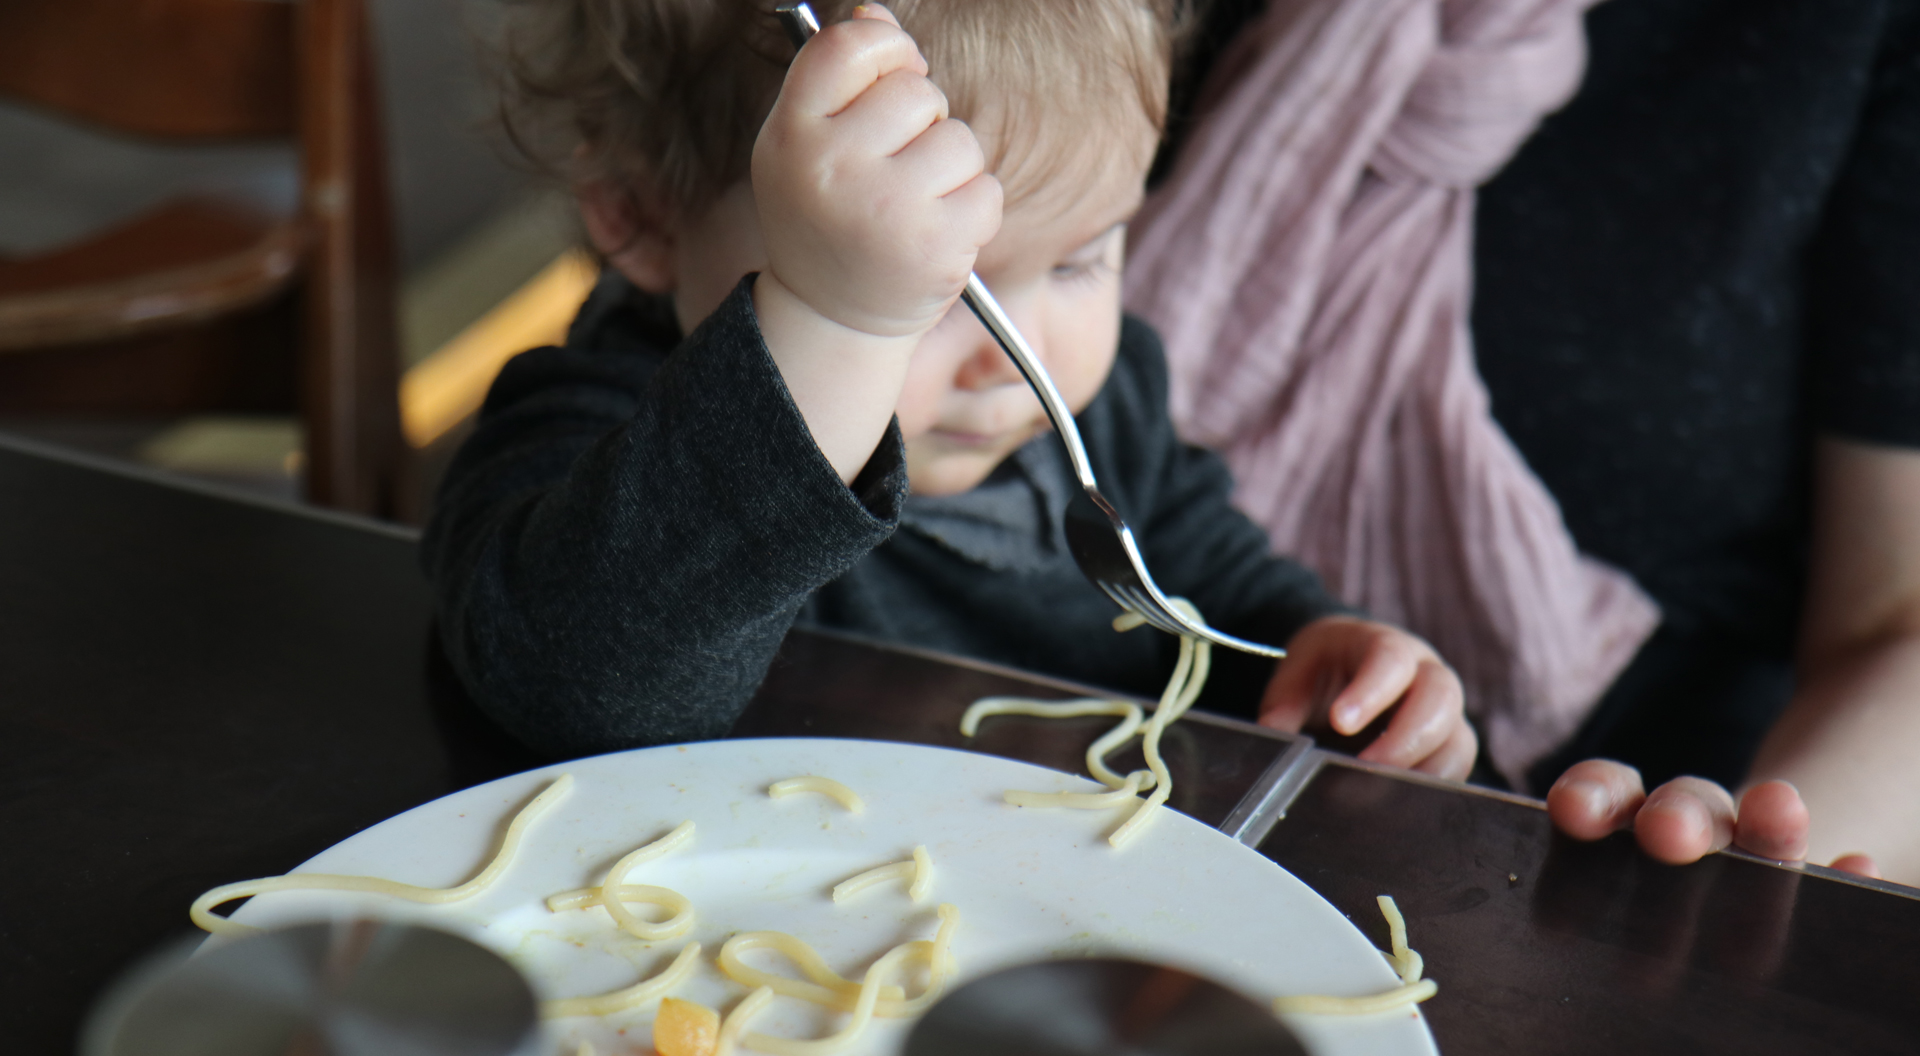 Baby-led-weaning, BLW, Beikost